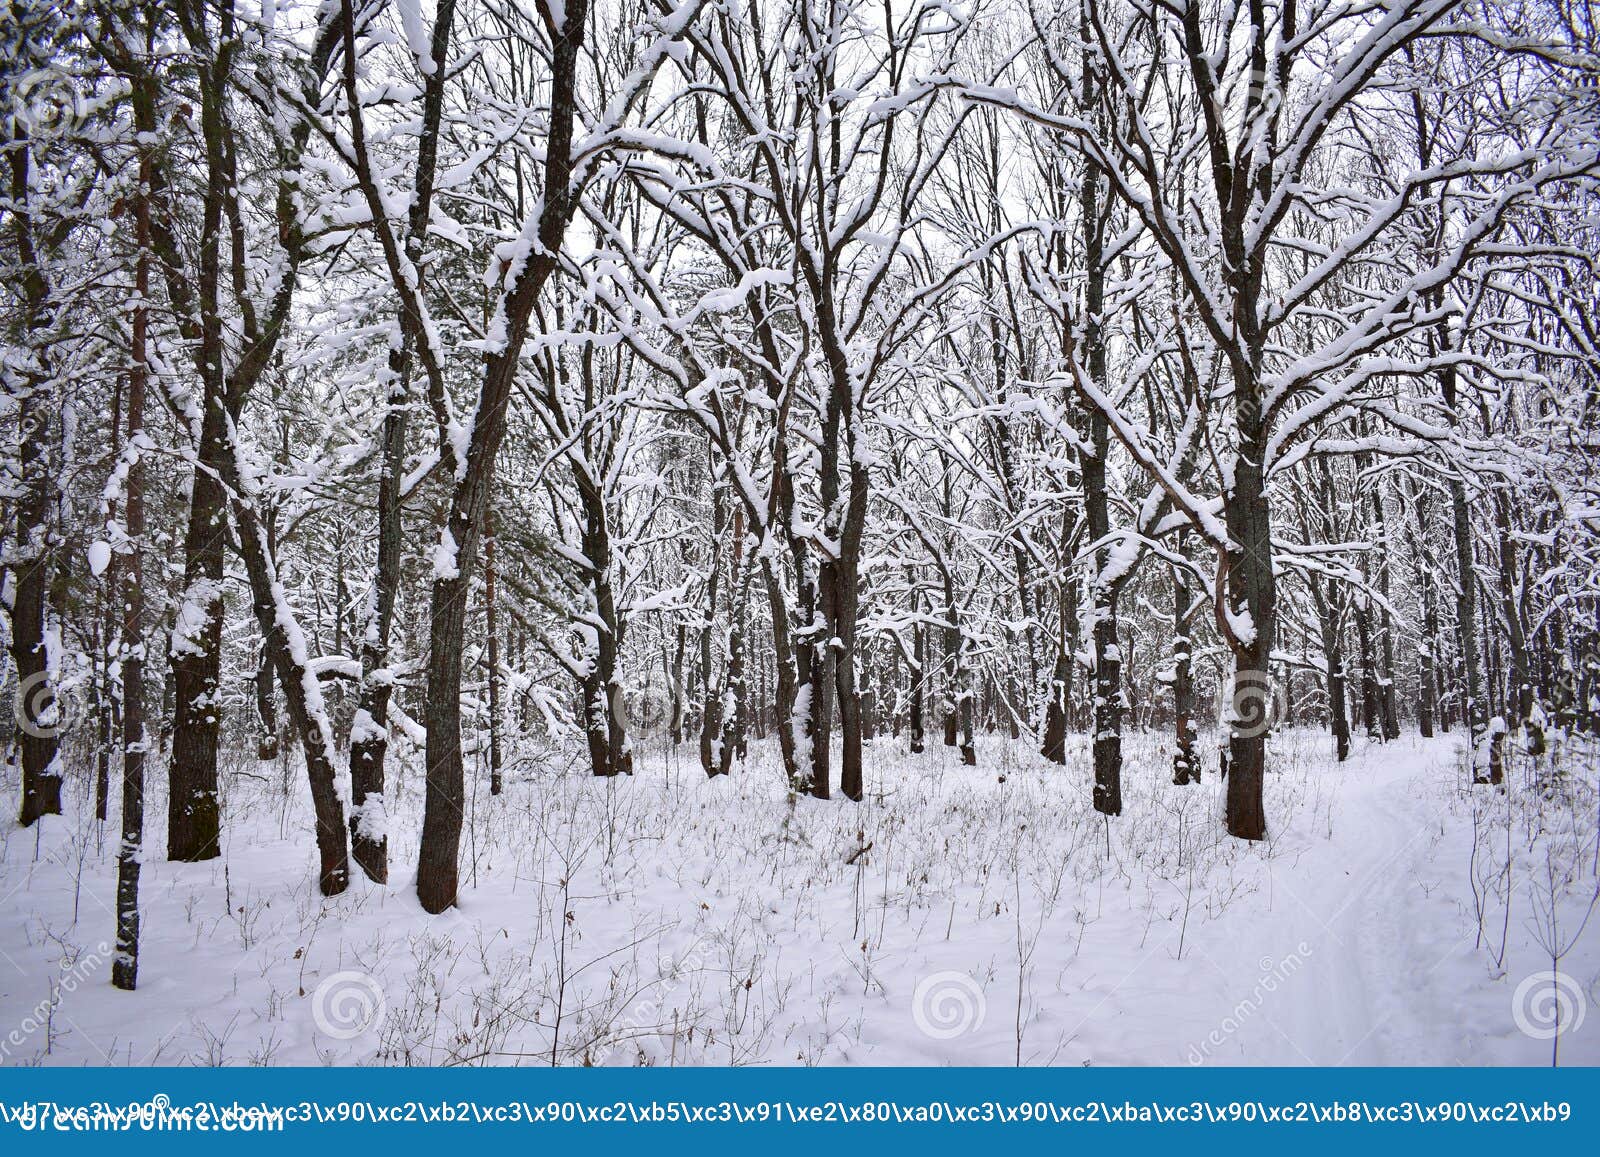 the contemplation of amazing winter forest gives a sensation of cheerfulness and fullness of life